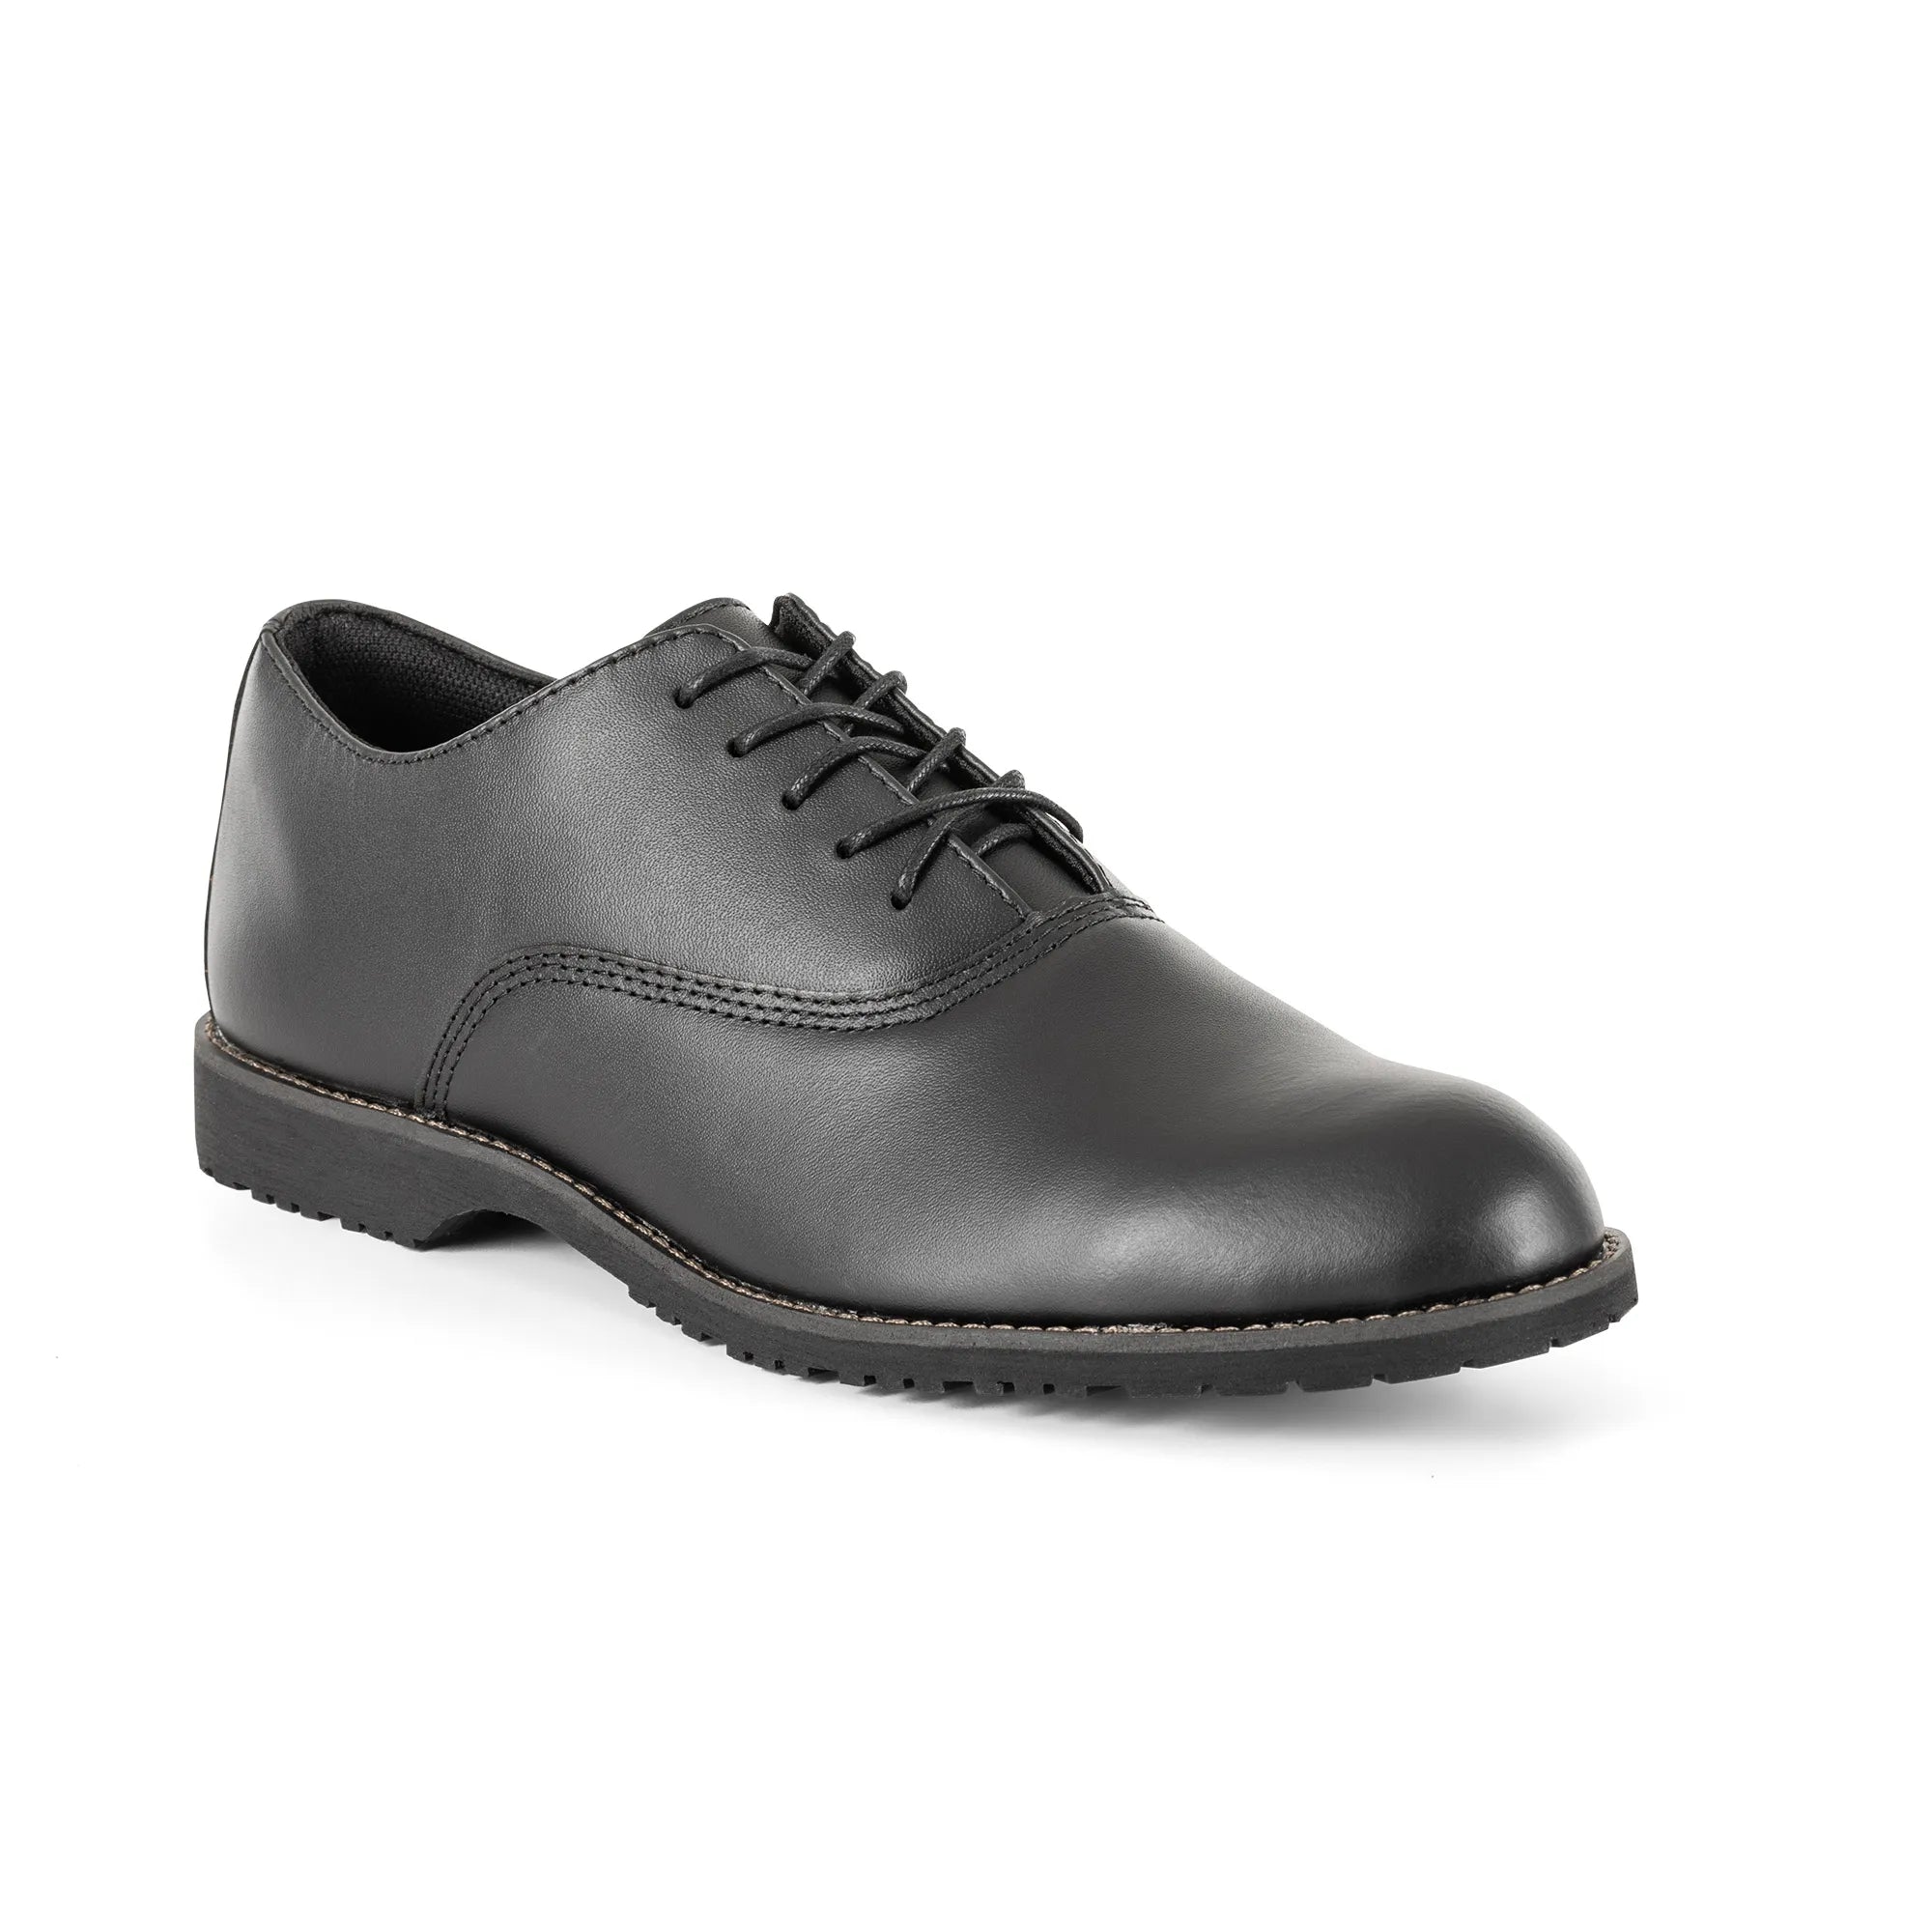 5.11® Tactical - Duty Oxford Shoe